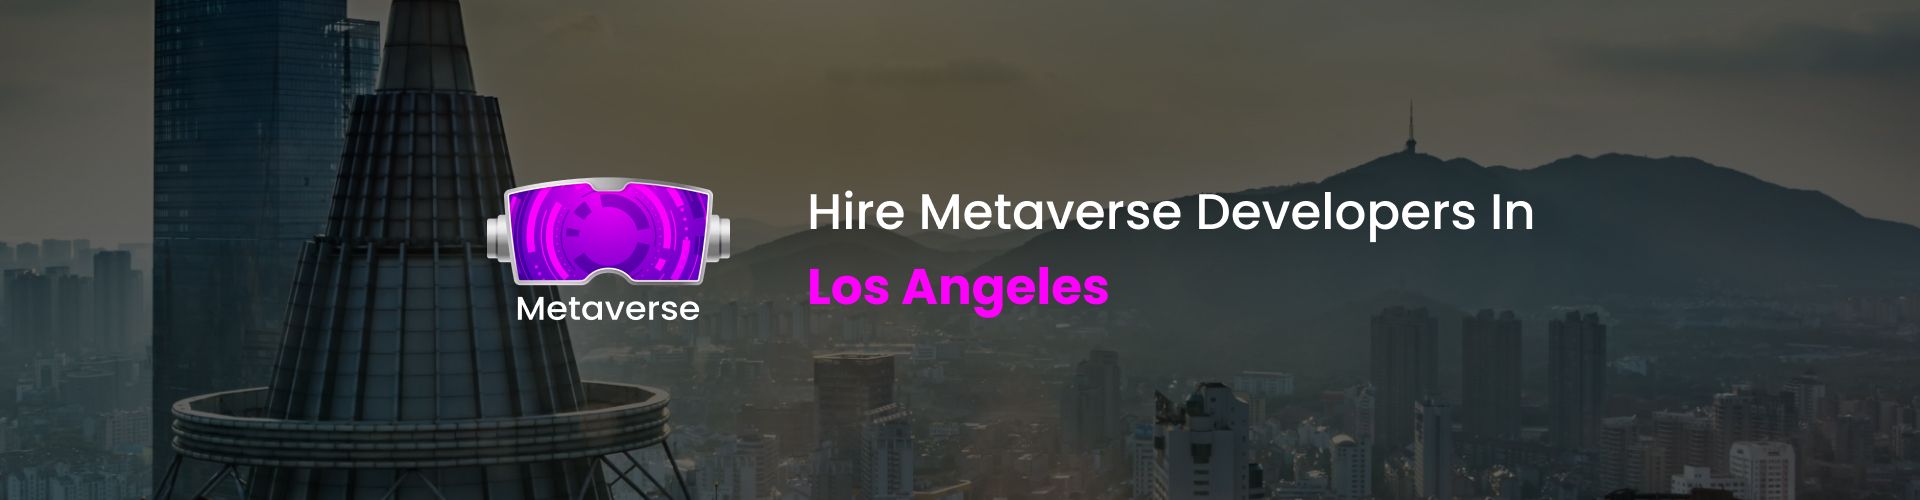 hire metaverse developers in los angeles